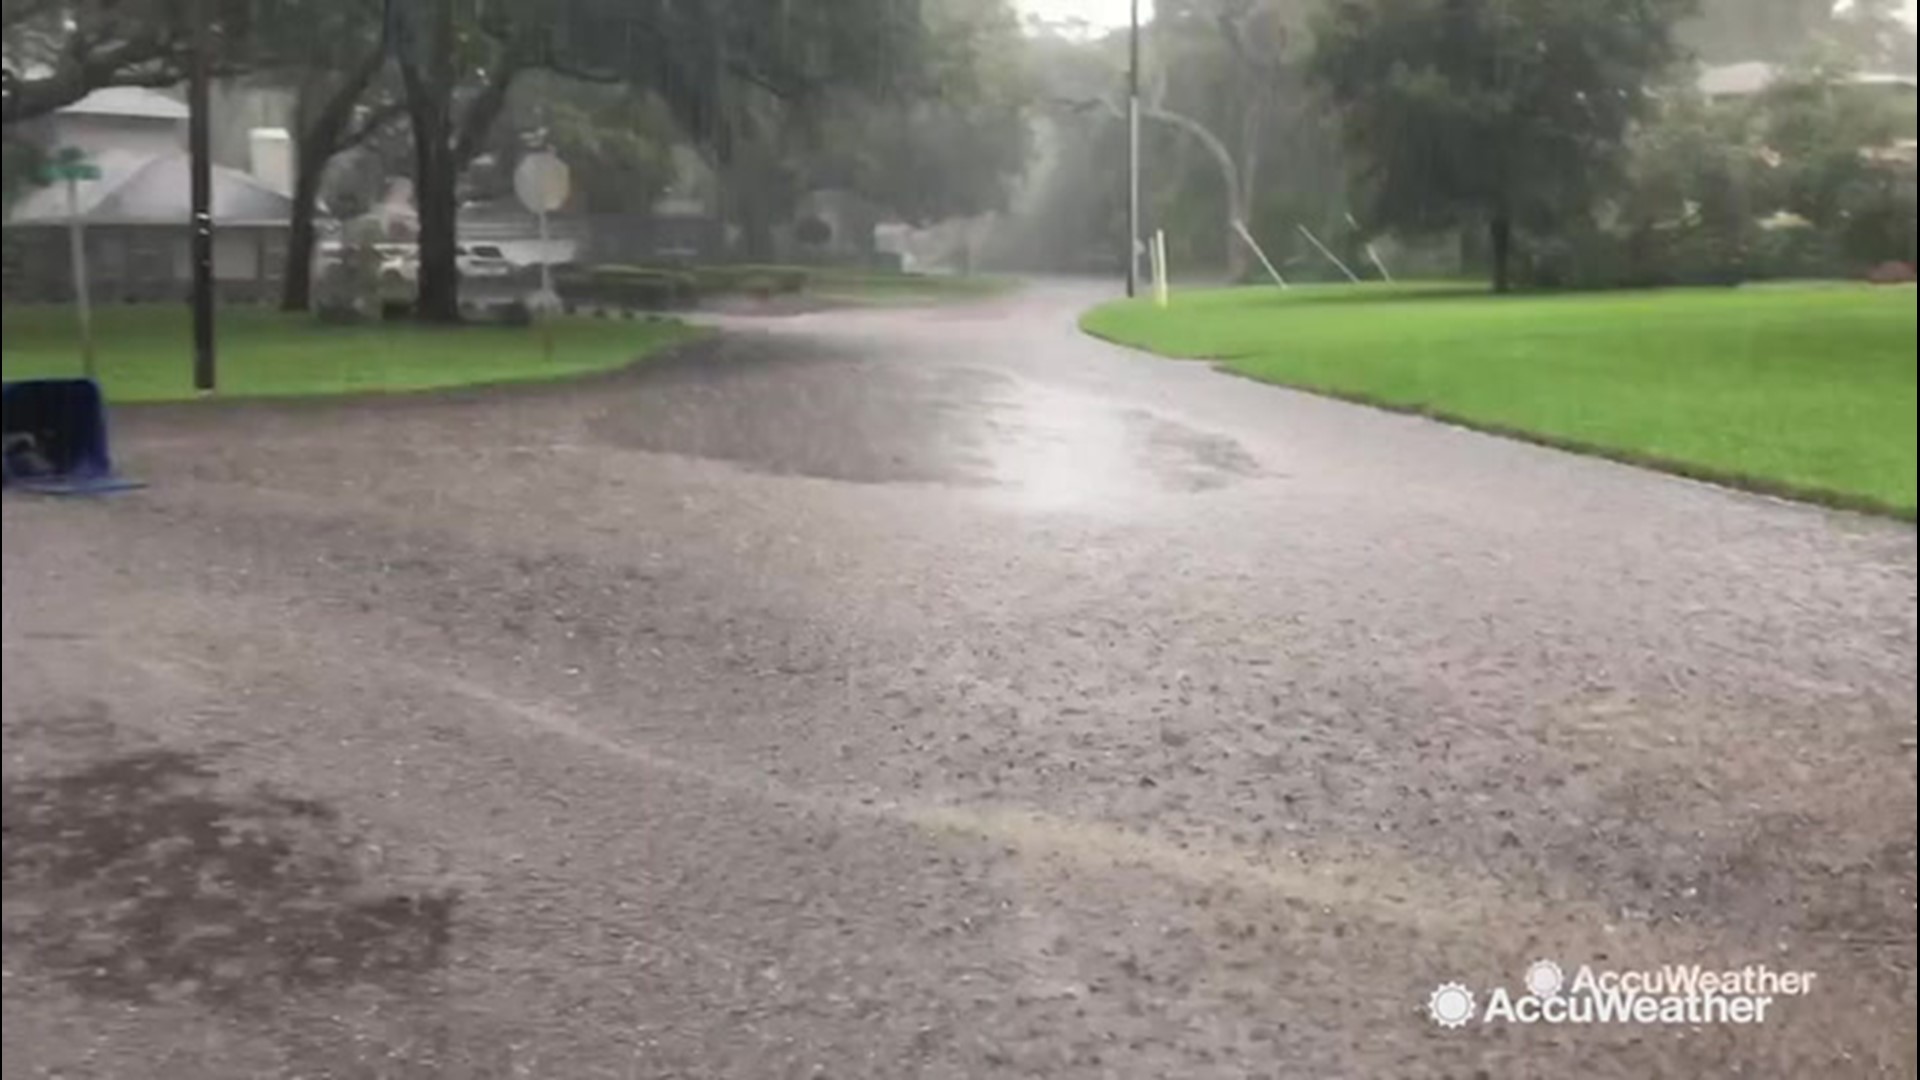 St. Petersburg, Florida, experienced some heavy rainfall that caused water to build up on city streets on Aug. 13.